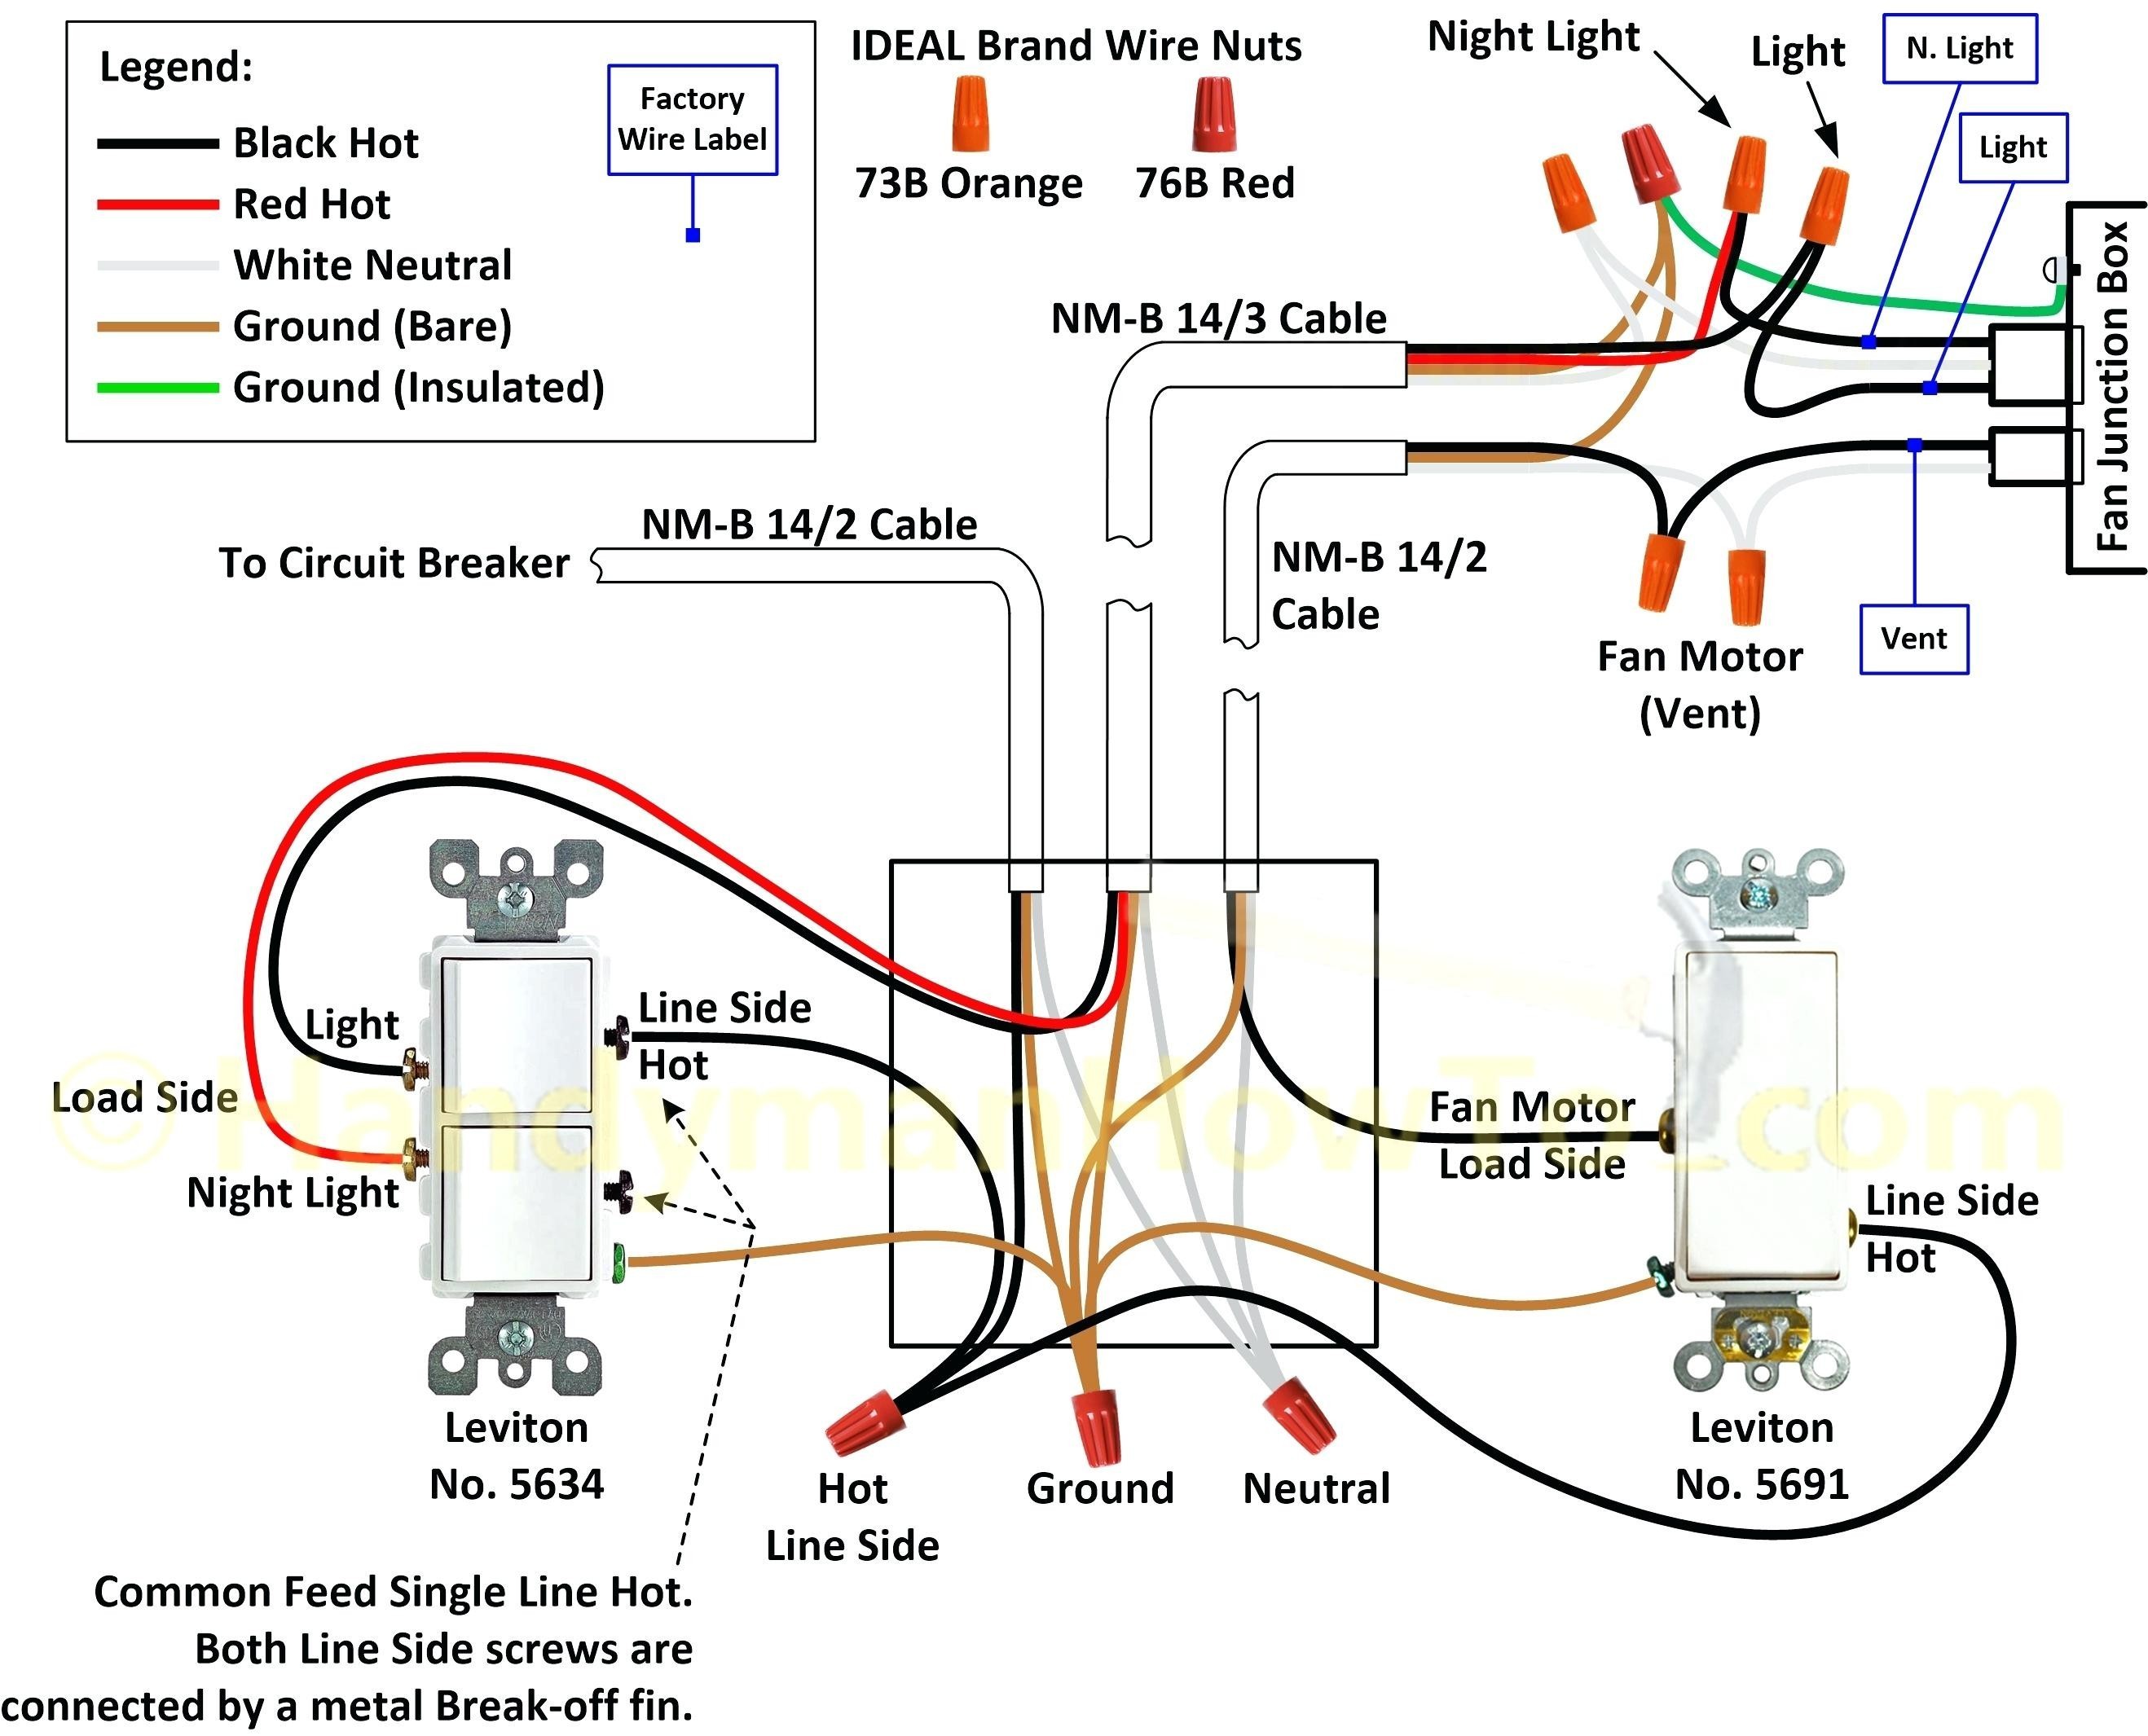 House Lighting Wiring Diagram Uk Best Wiring Diagram for Light with Two Switches Best 3 Way